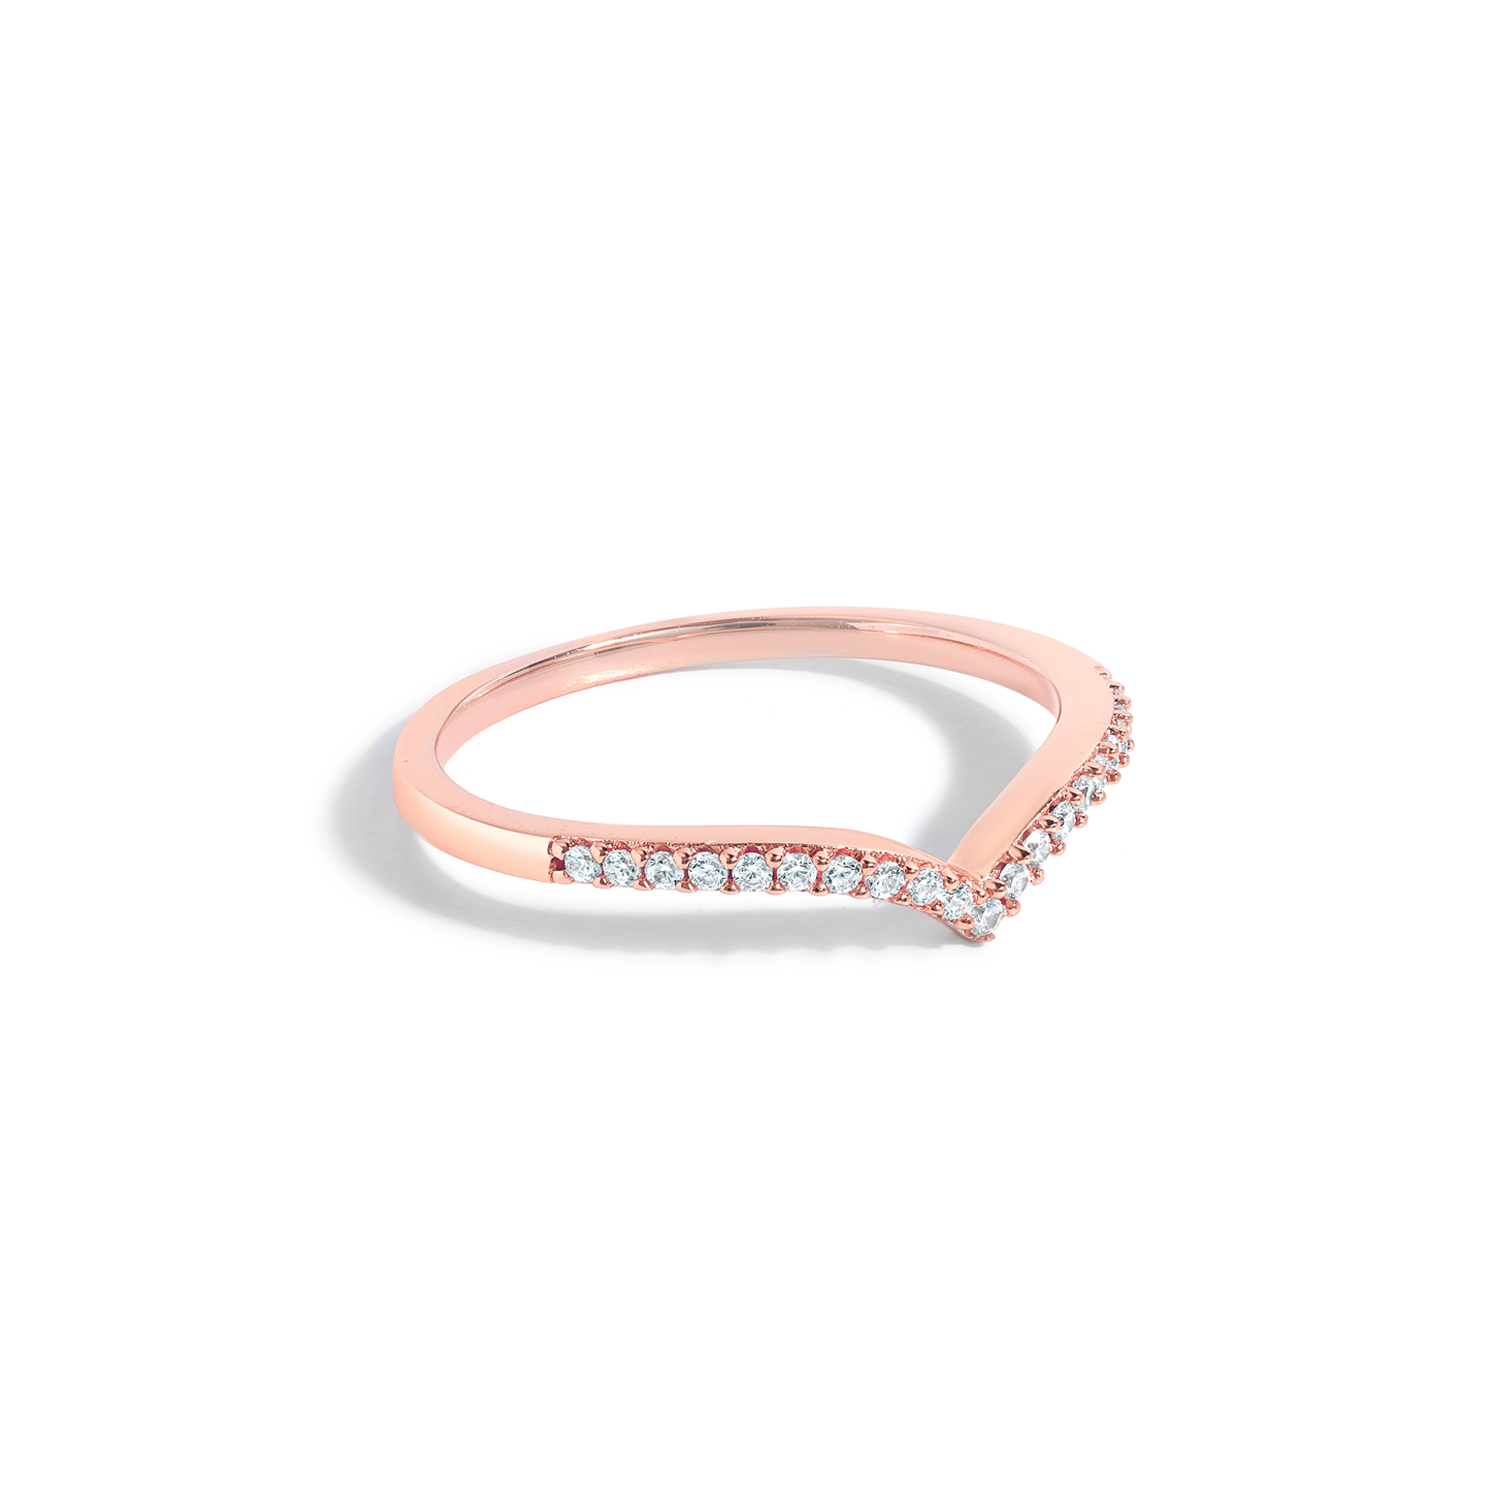 Elegant and classy double ring set with cubic zirconia in rose gold.